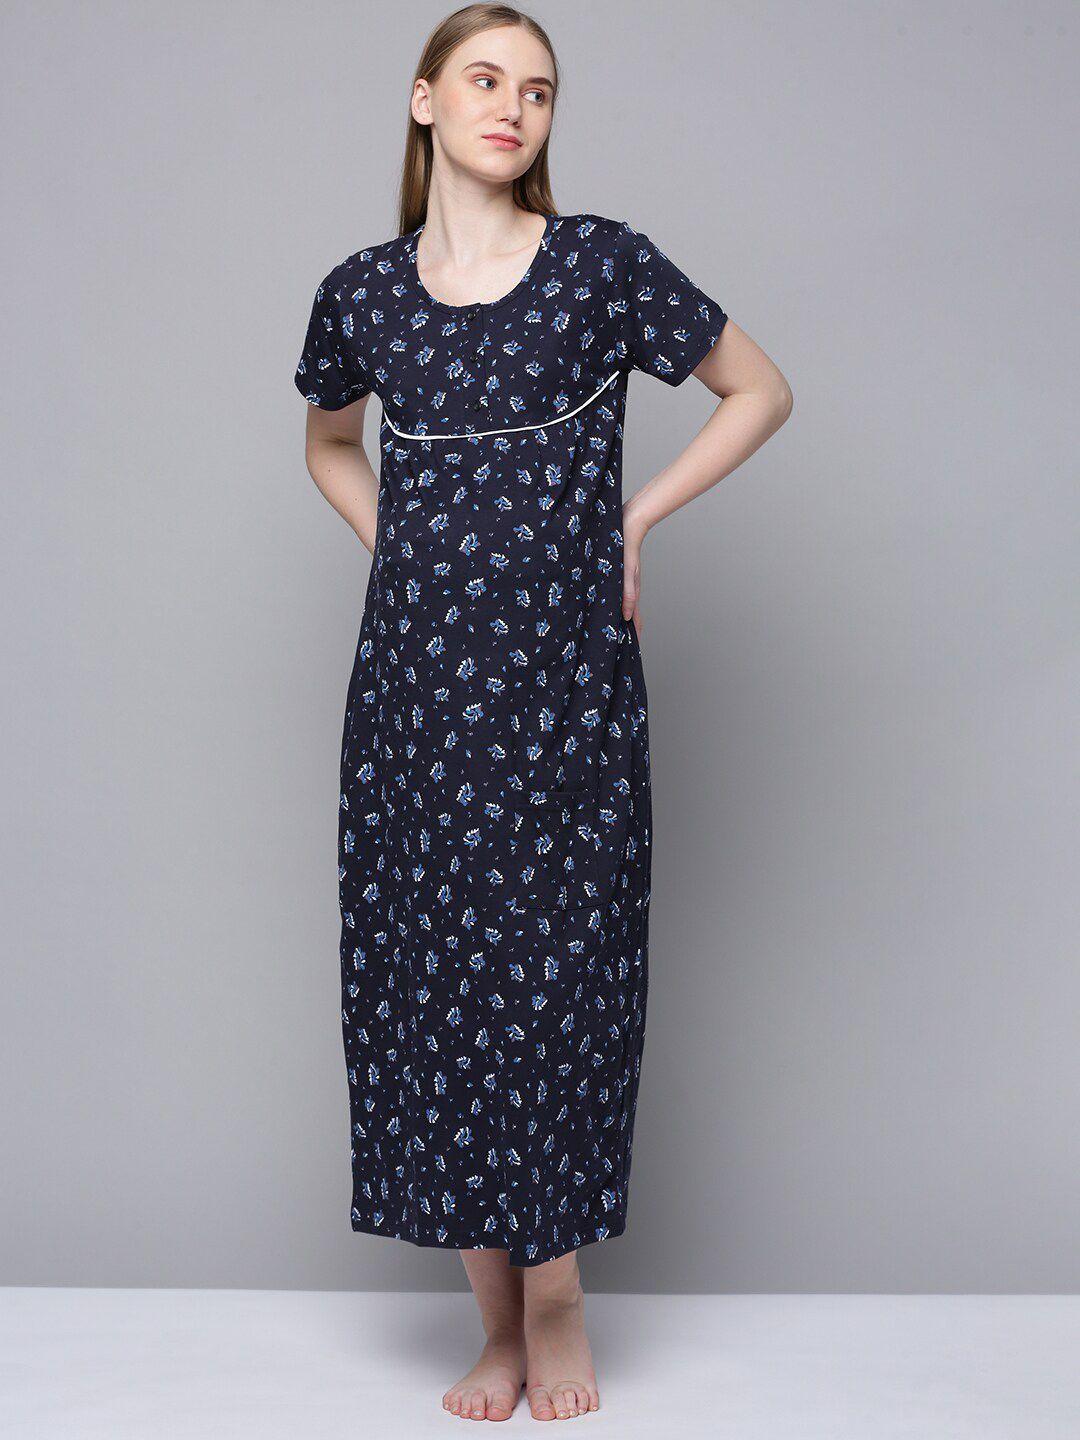 kryptic floral printed pure cotton maternity maxi nightdress